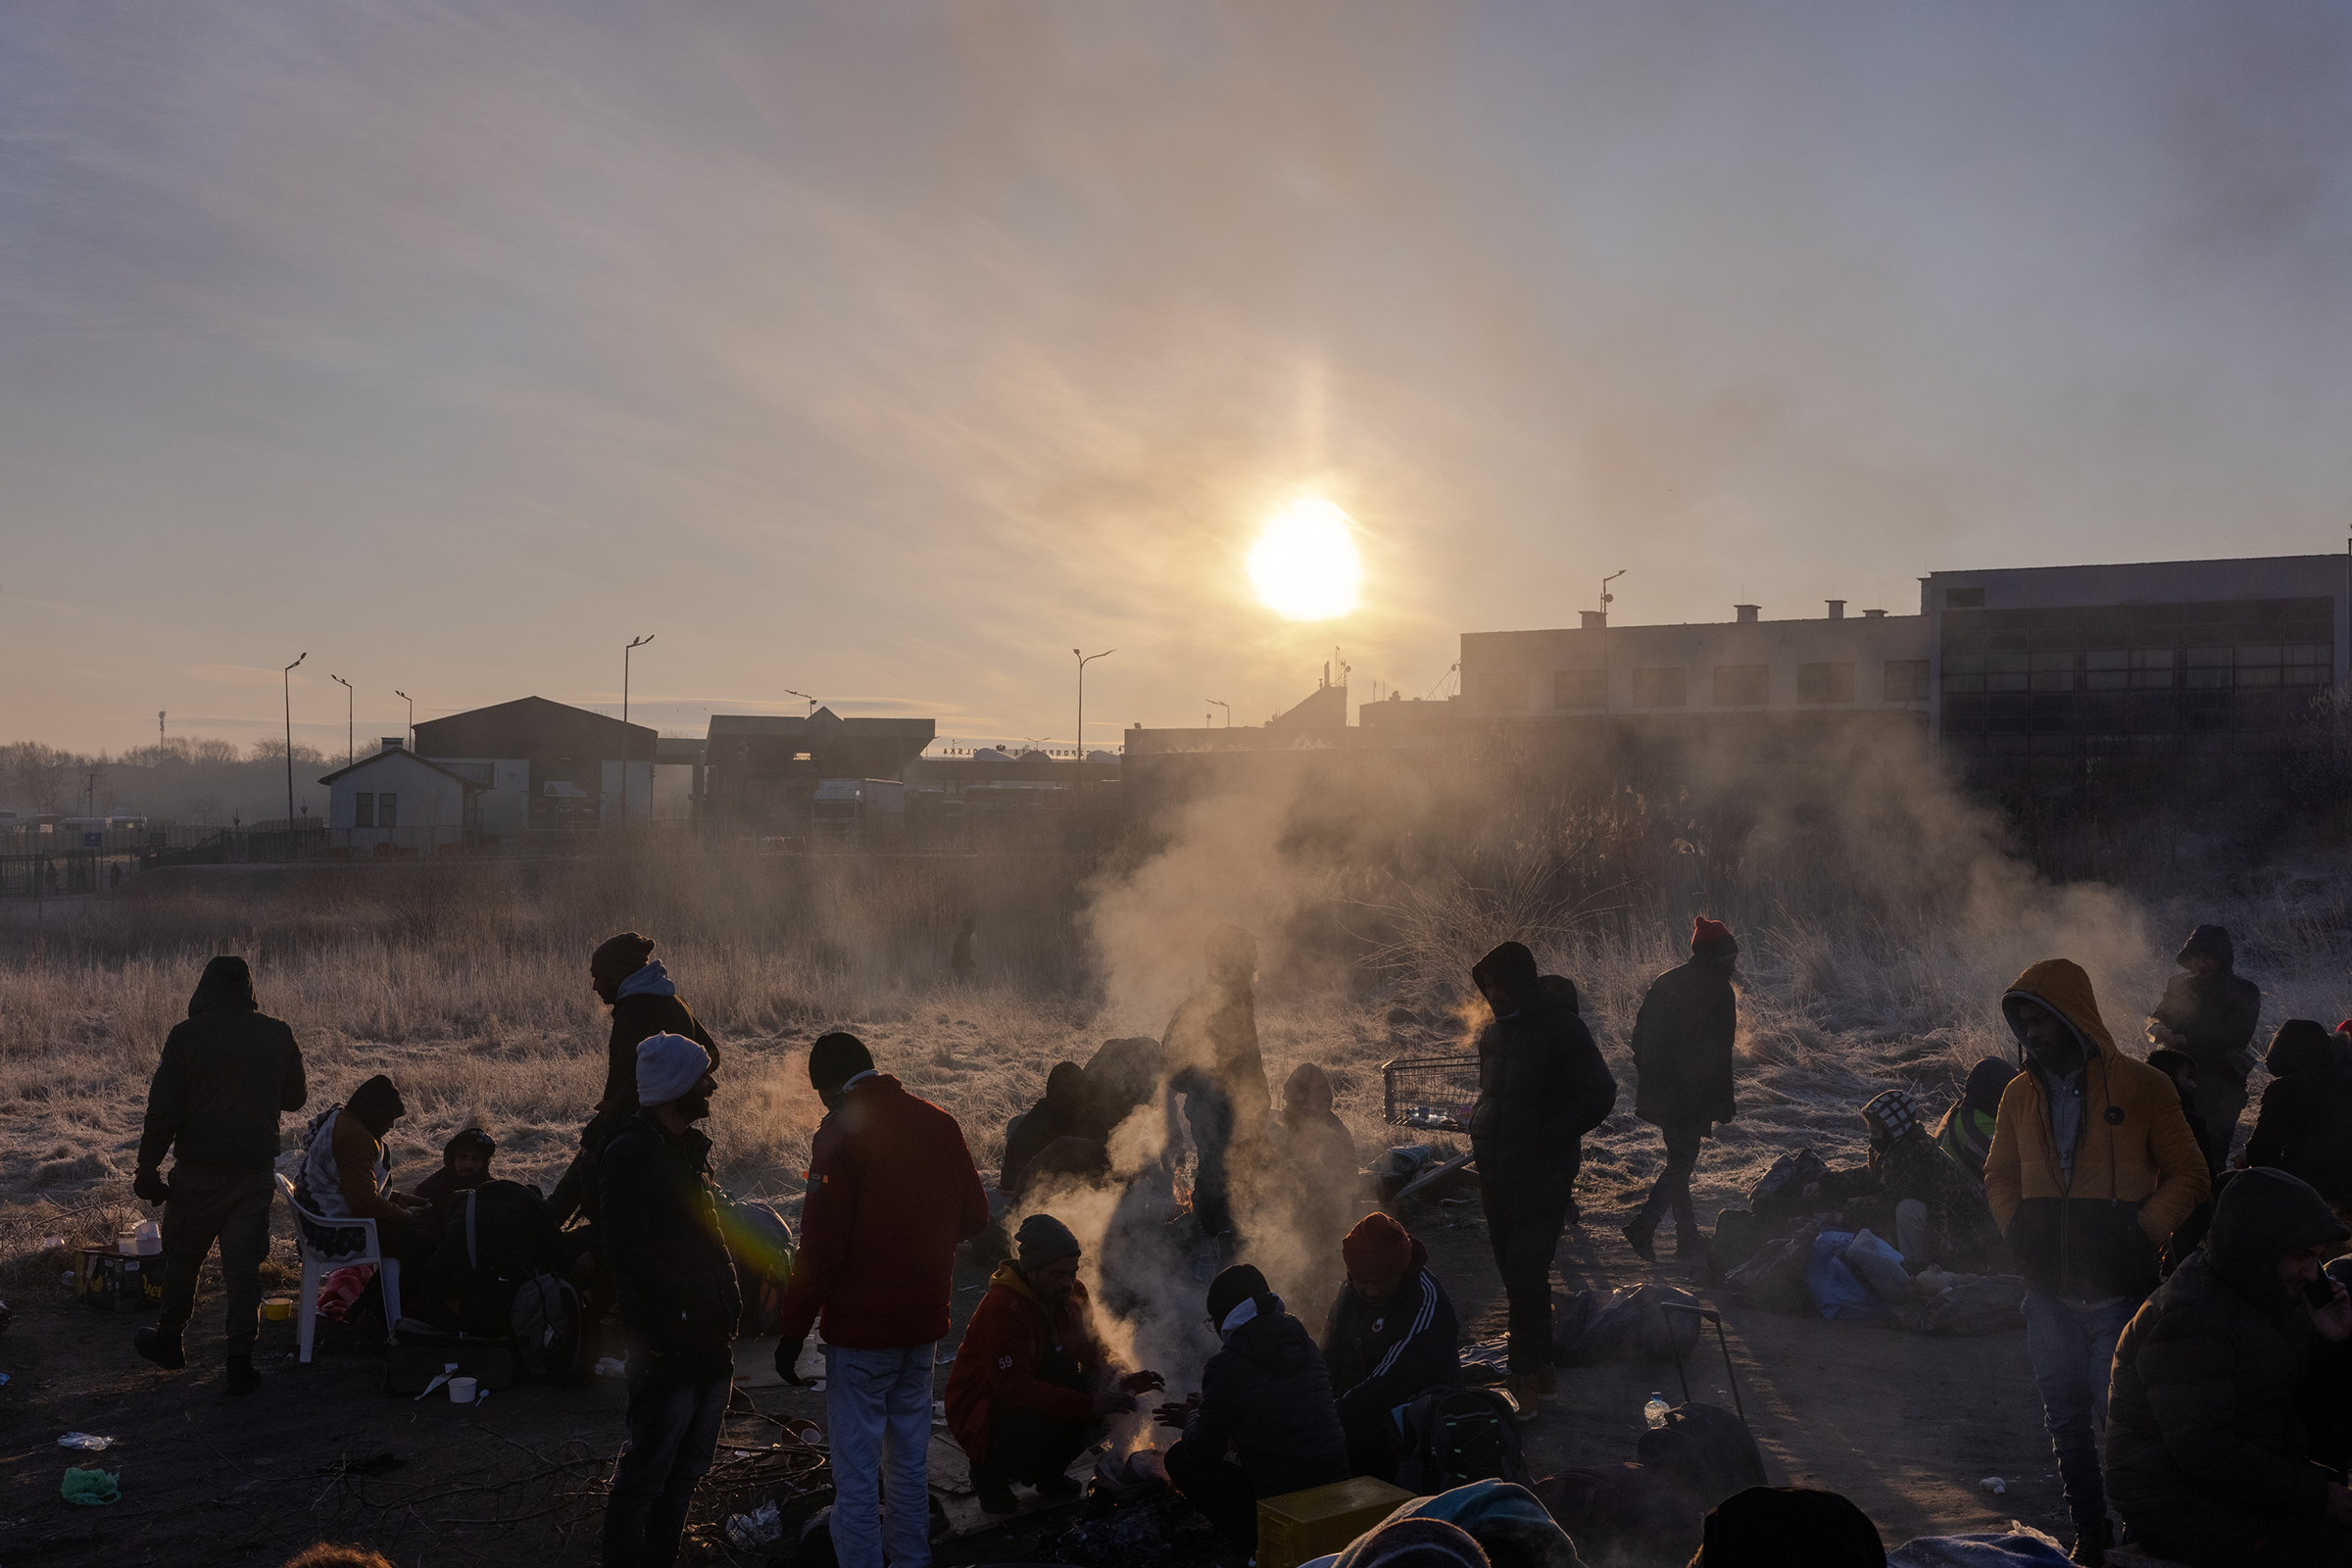 Refugees wake after sleeping on blankets and cardboard on the ground on the Polish side of the Medyka crossing, on March 1. (Natalie Keyssar for TIME)